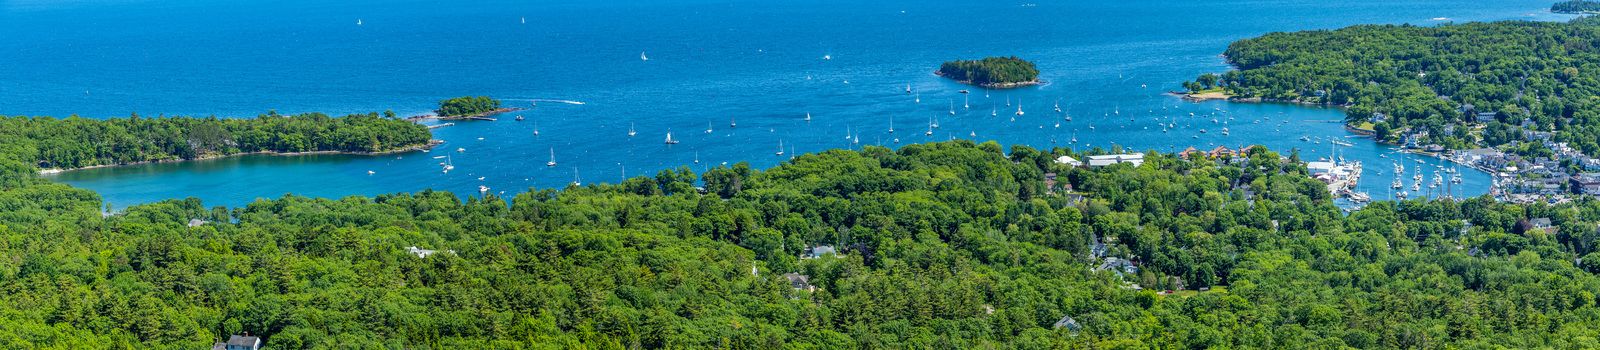 A view of the harbor in Camden, Maine from the summit of Mount Battie in Camden Hills State Park.